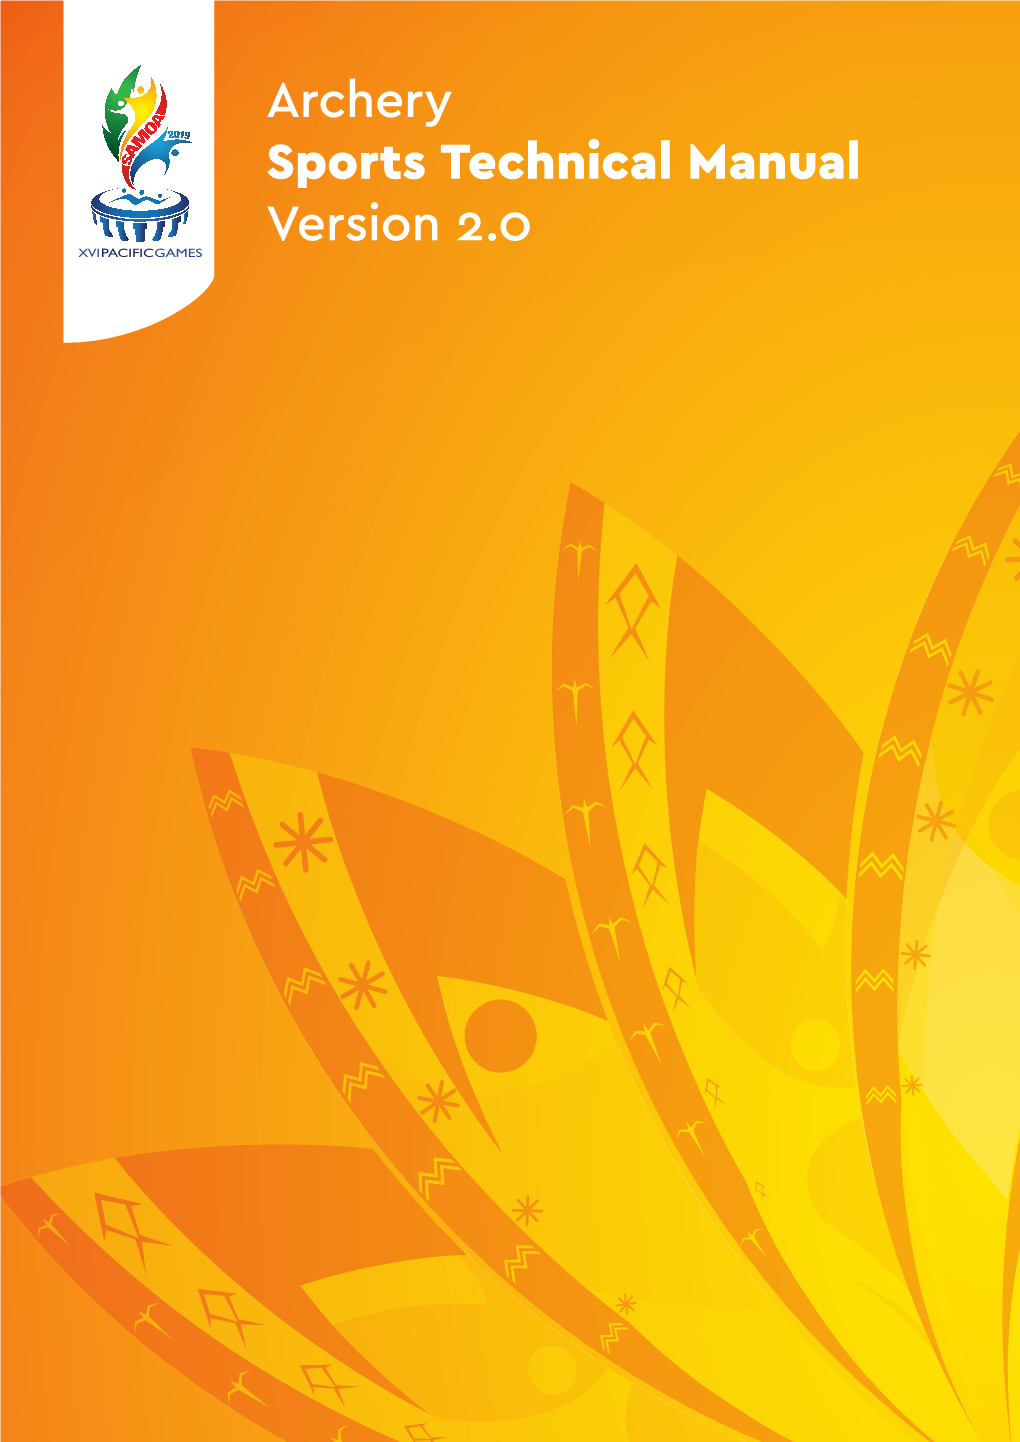 Archery Sports Technical Manual Version 2.0 TABLE of CONTENTS